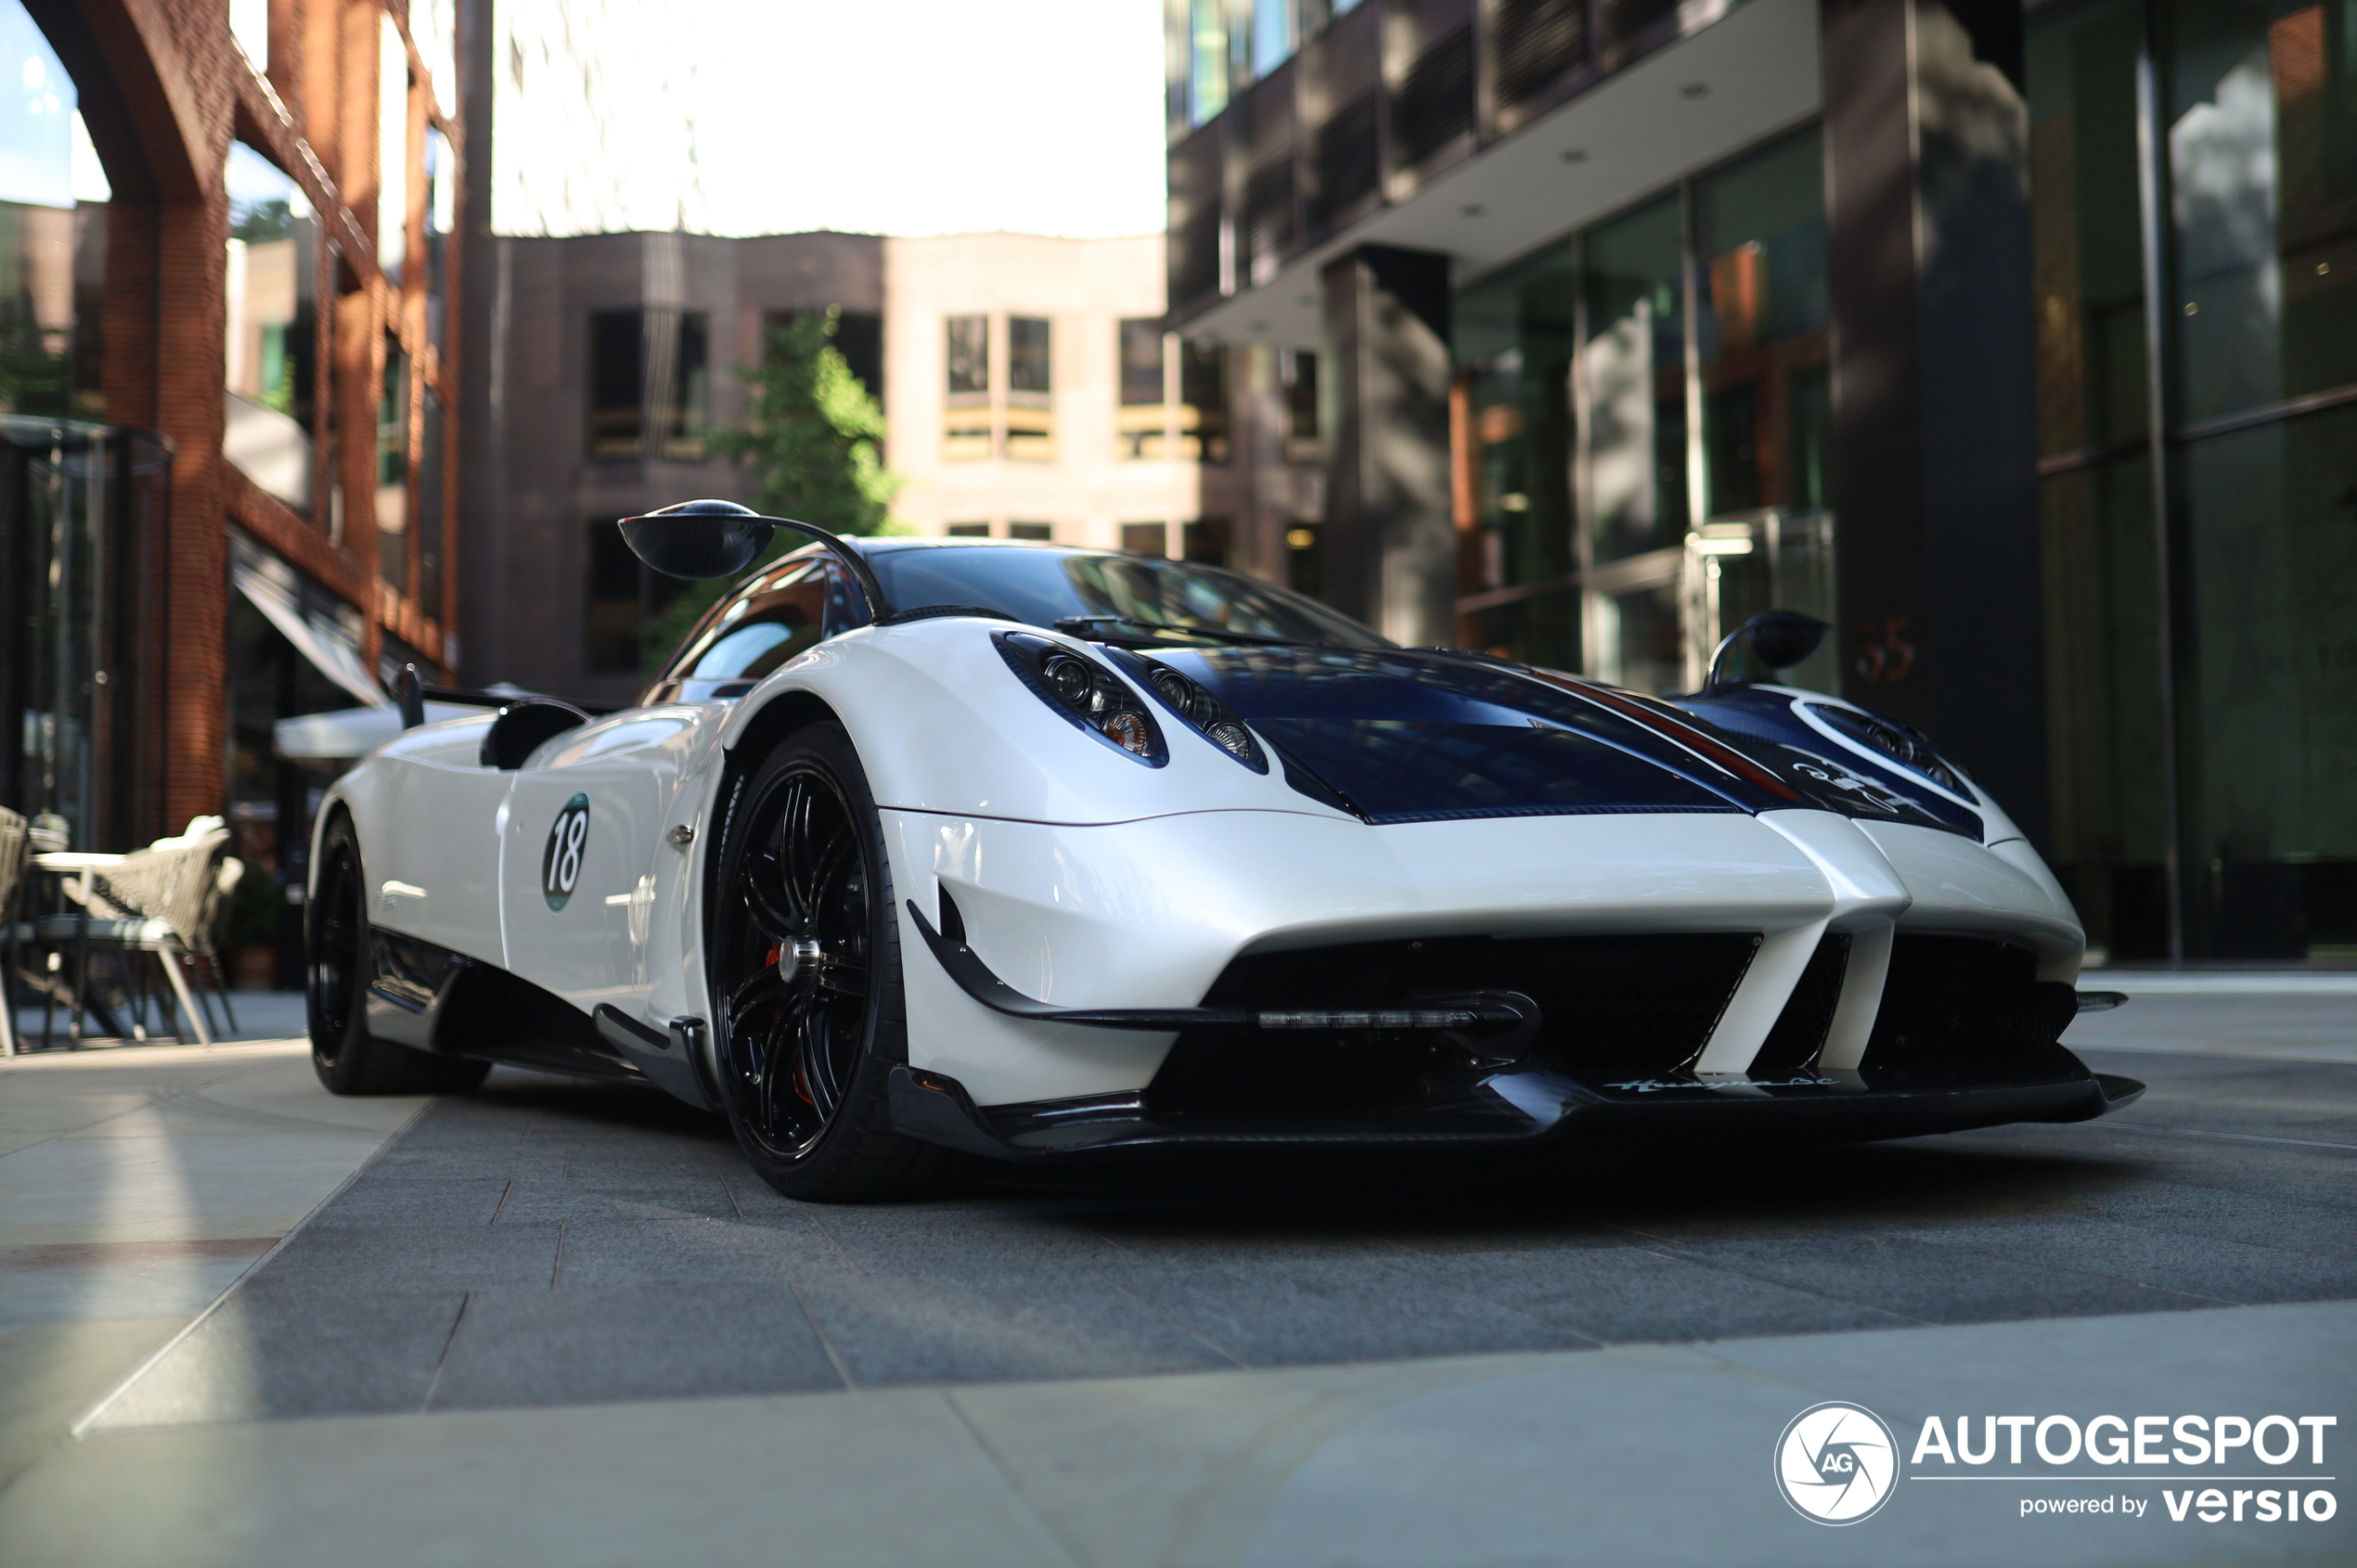 Huayra BC shows up in London